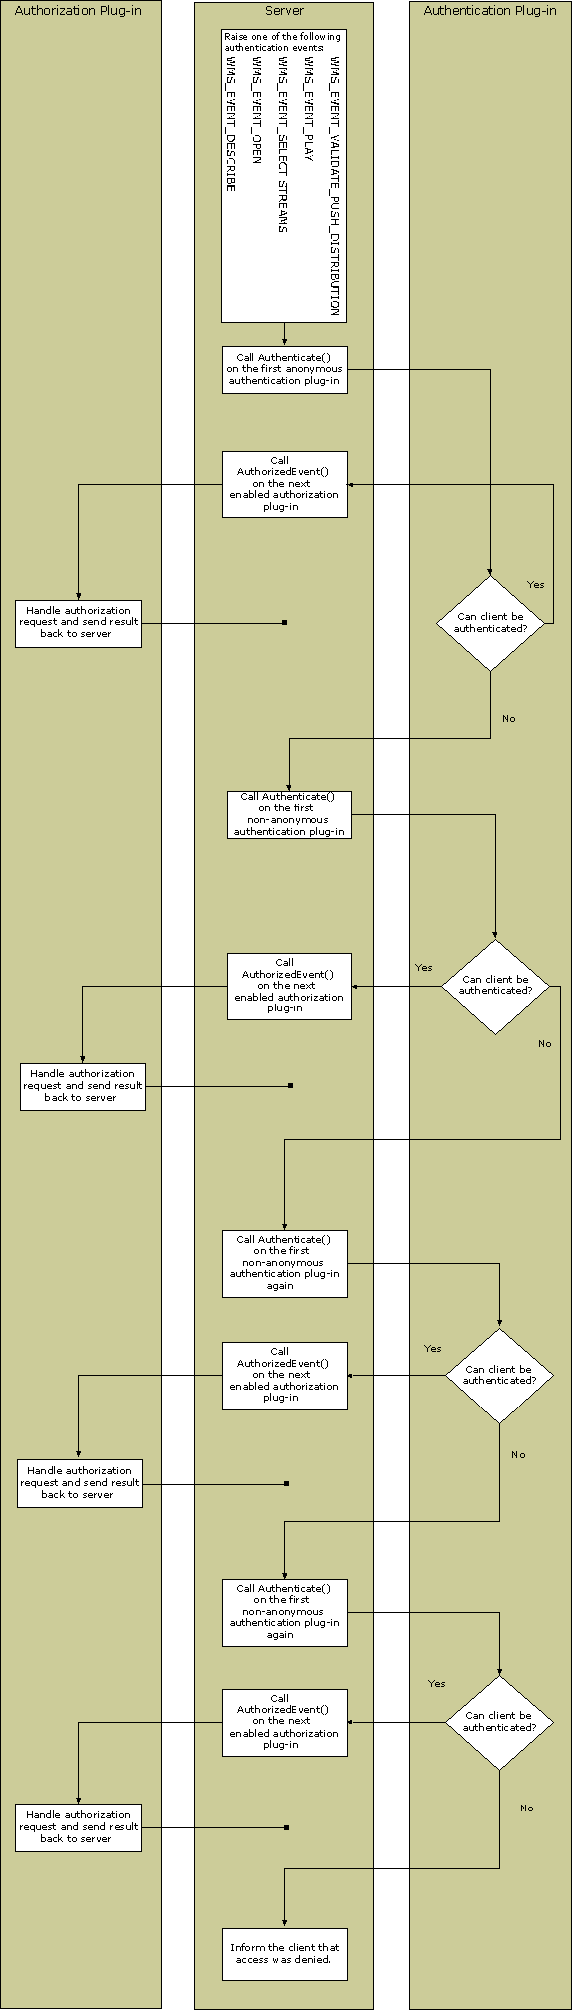 Flowchart showing interaction between authentication plug-ins, authorization plug-ins, and the server, when a Windows Media Player 9 Series or later client tries to authenticate. 